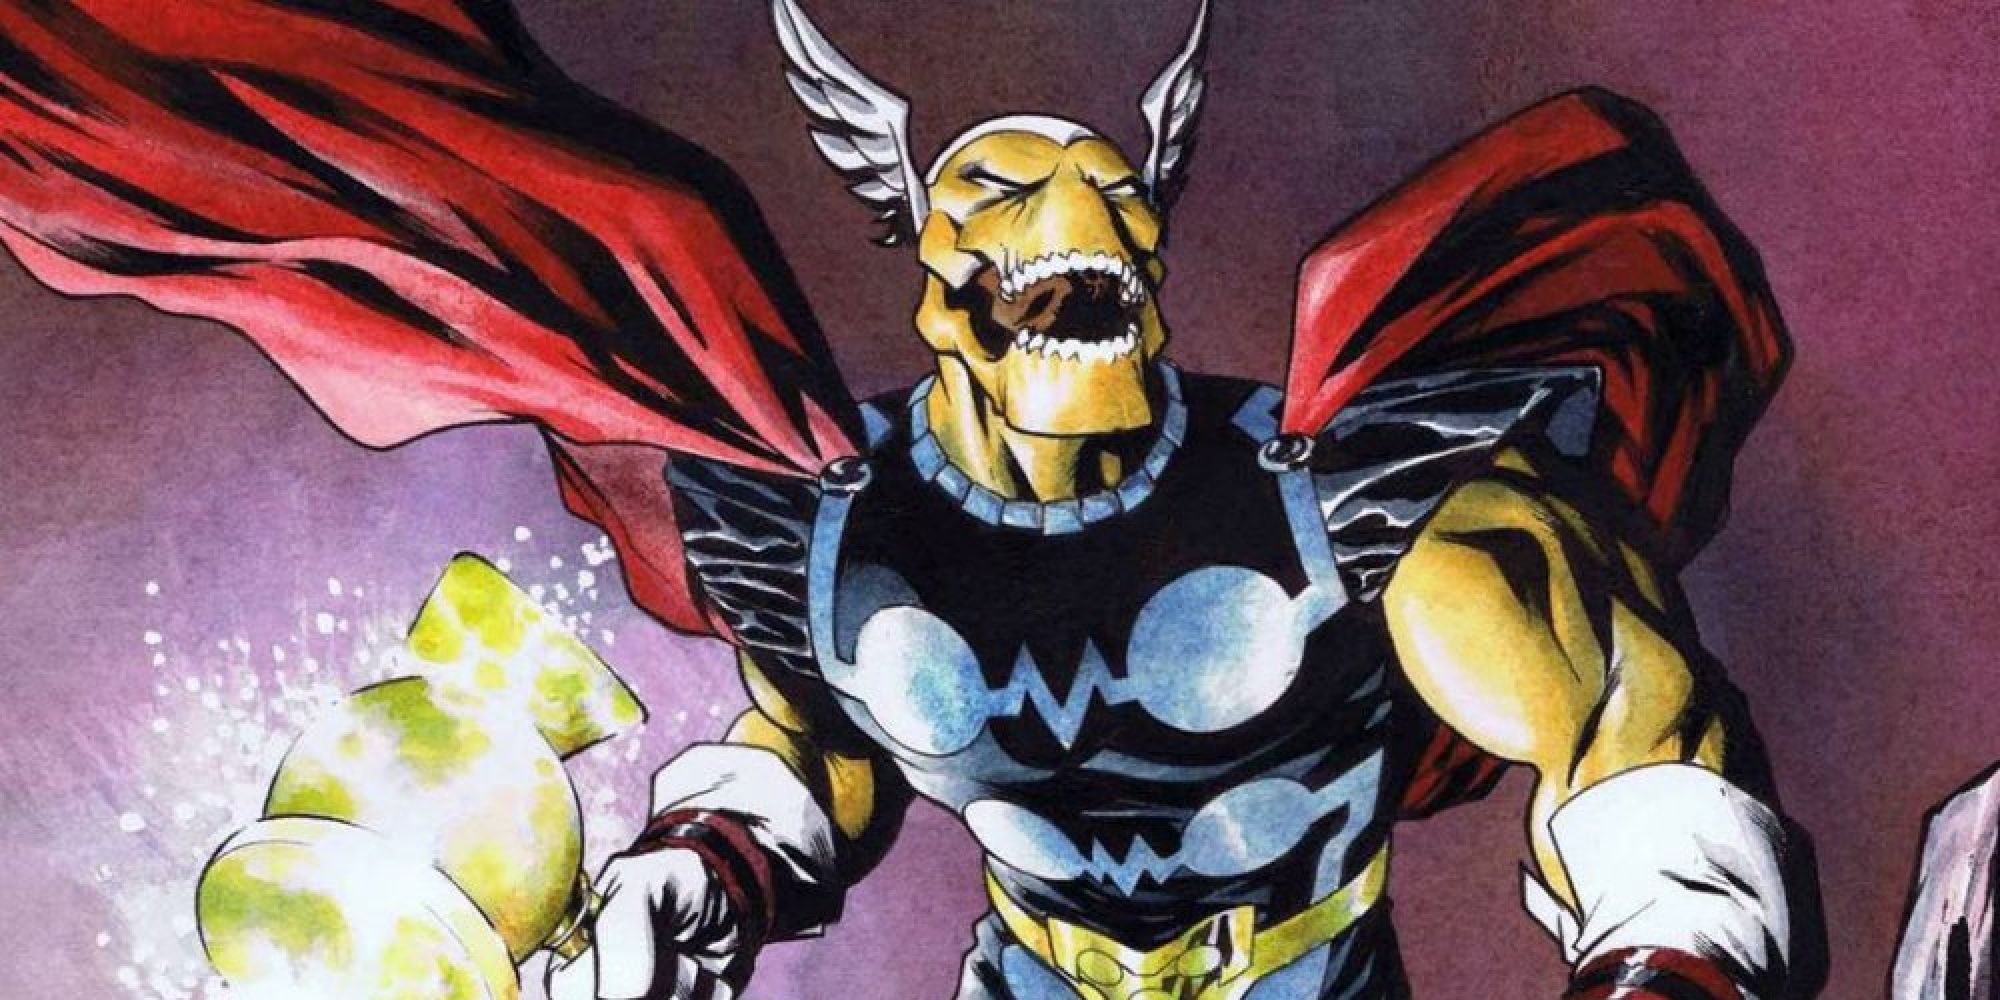 Beta Ray Bill dressed like Thor and wielding Stormbreaker